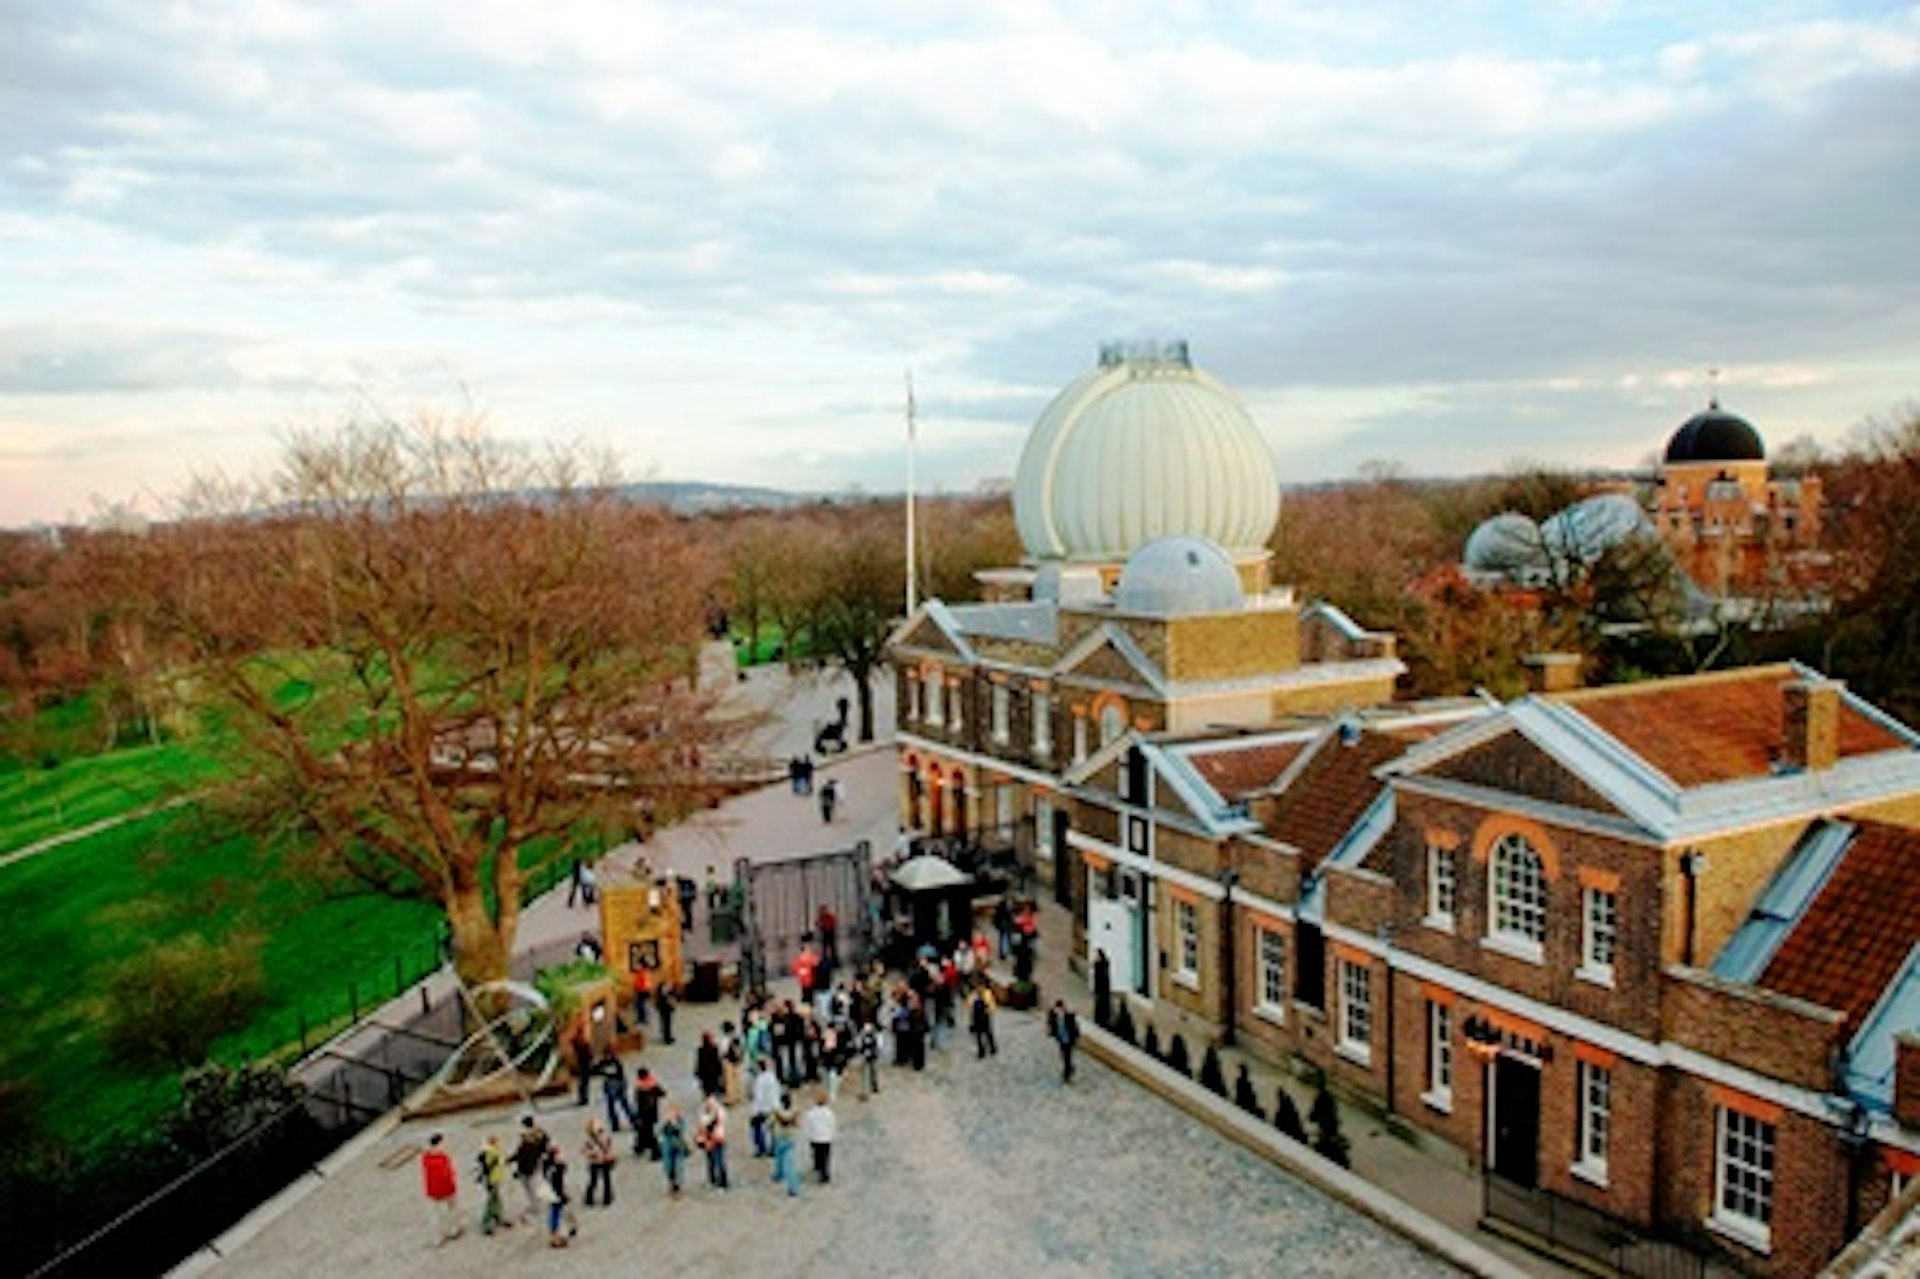 Visit the Royal Observatory Greenwich for Two 3